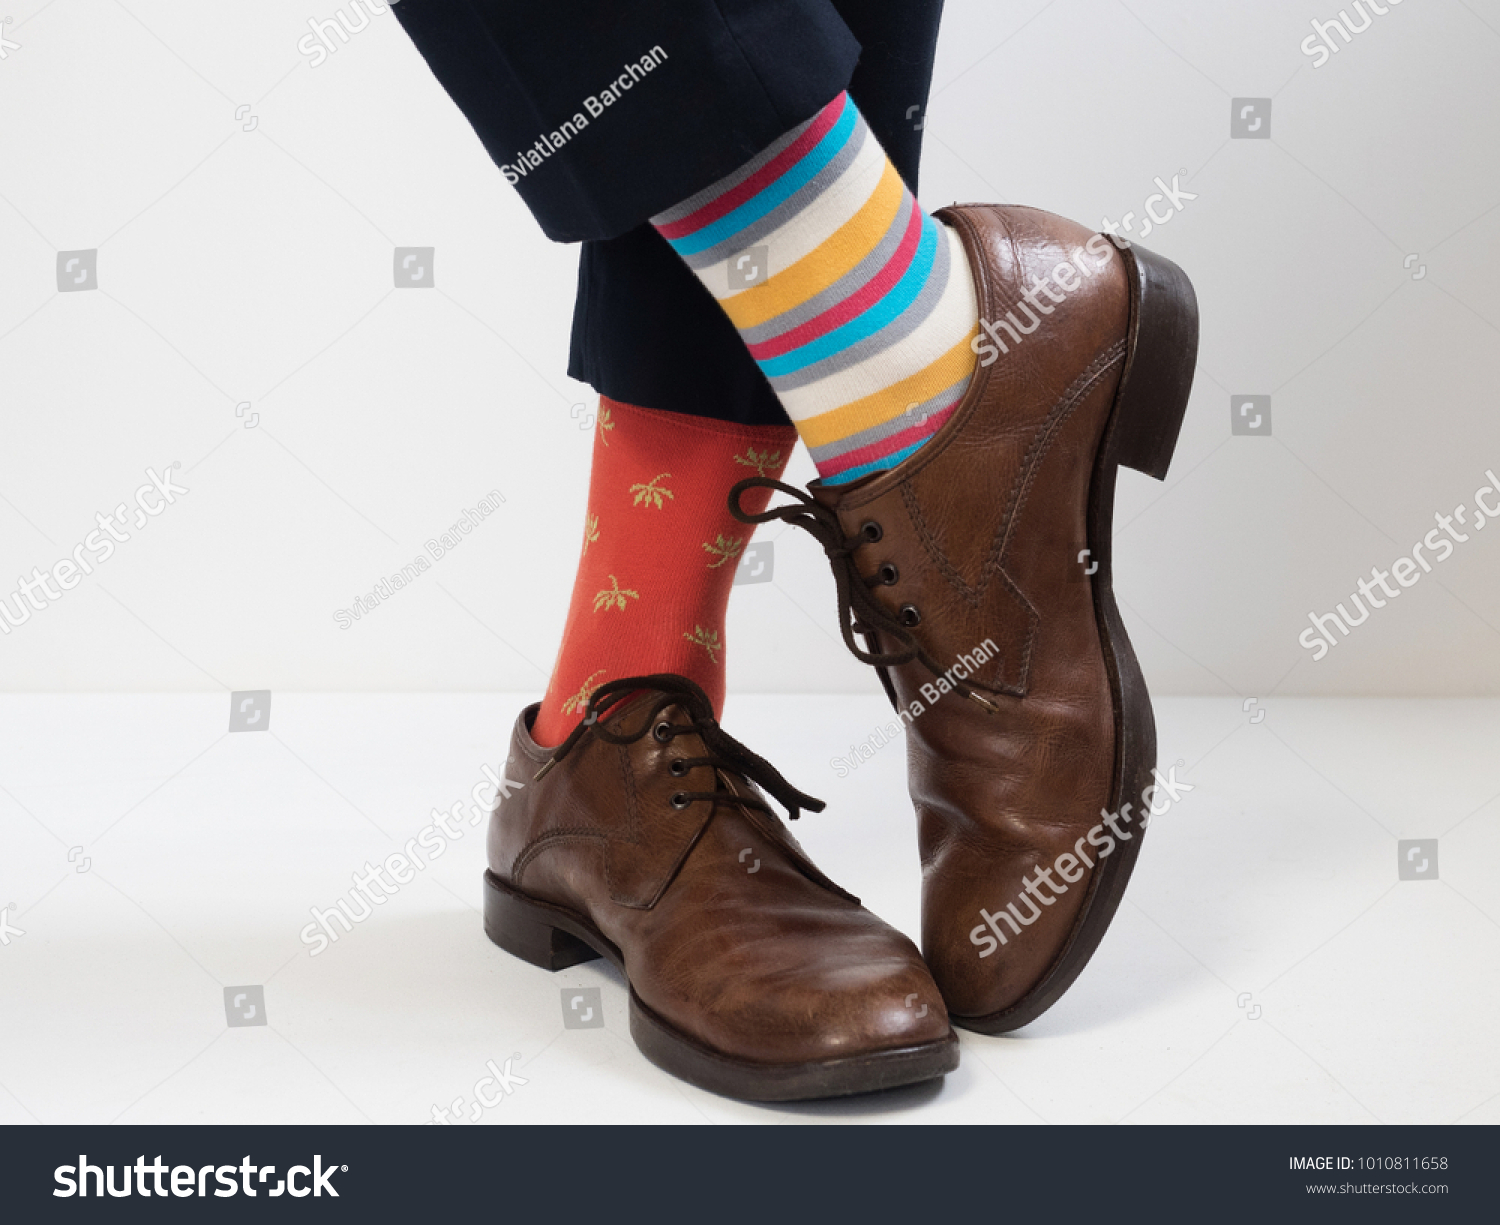 Men's feet in stylish shoes and funny socks #1010811658